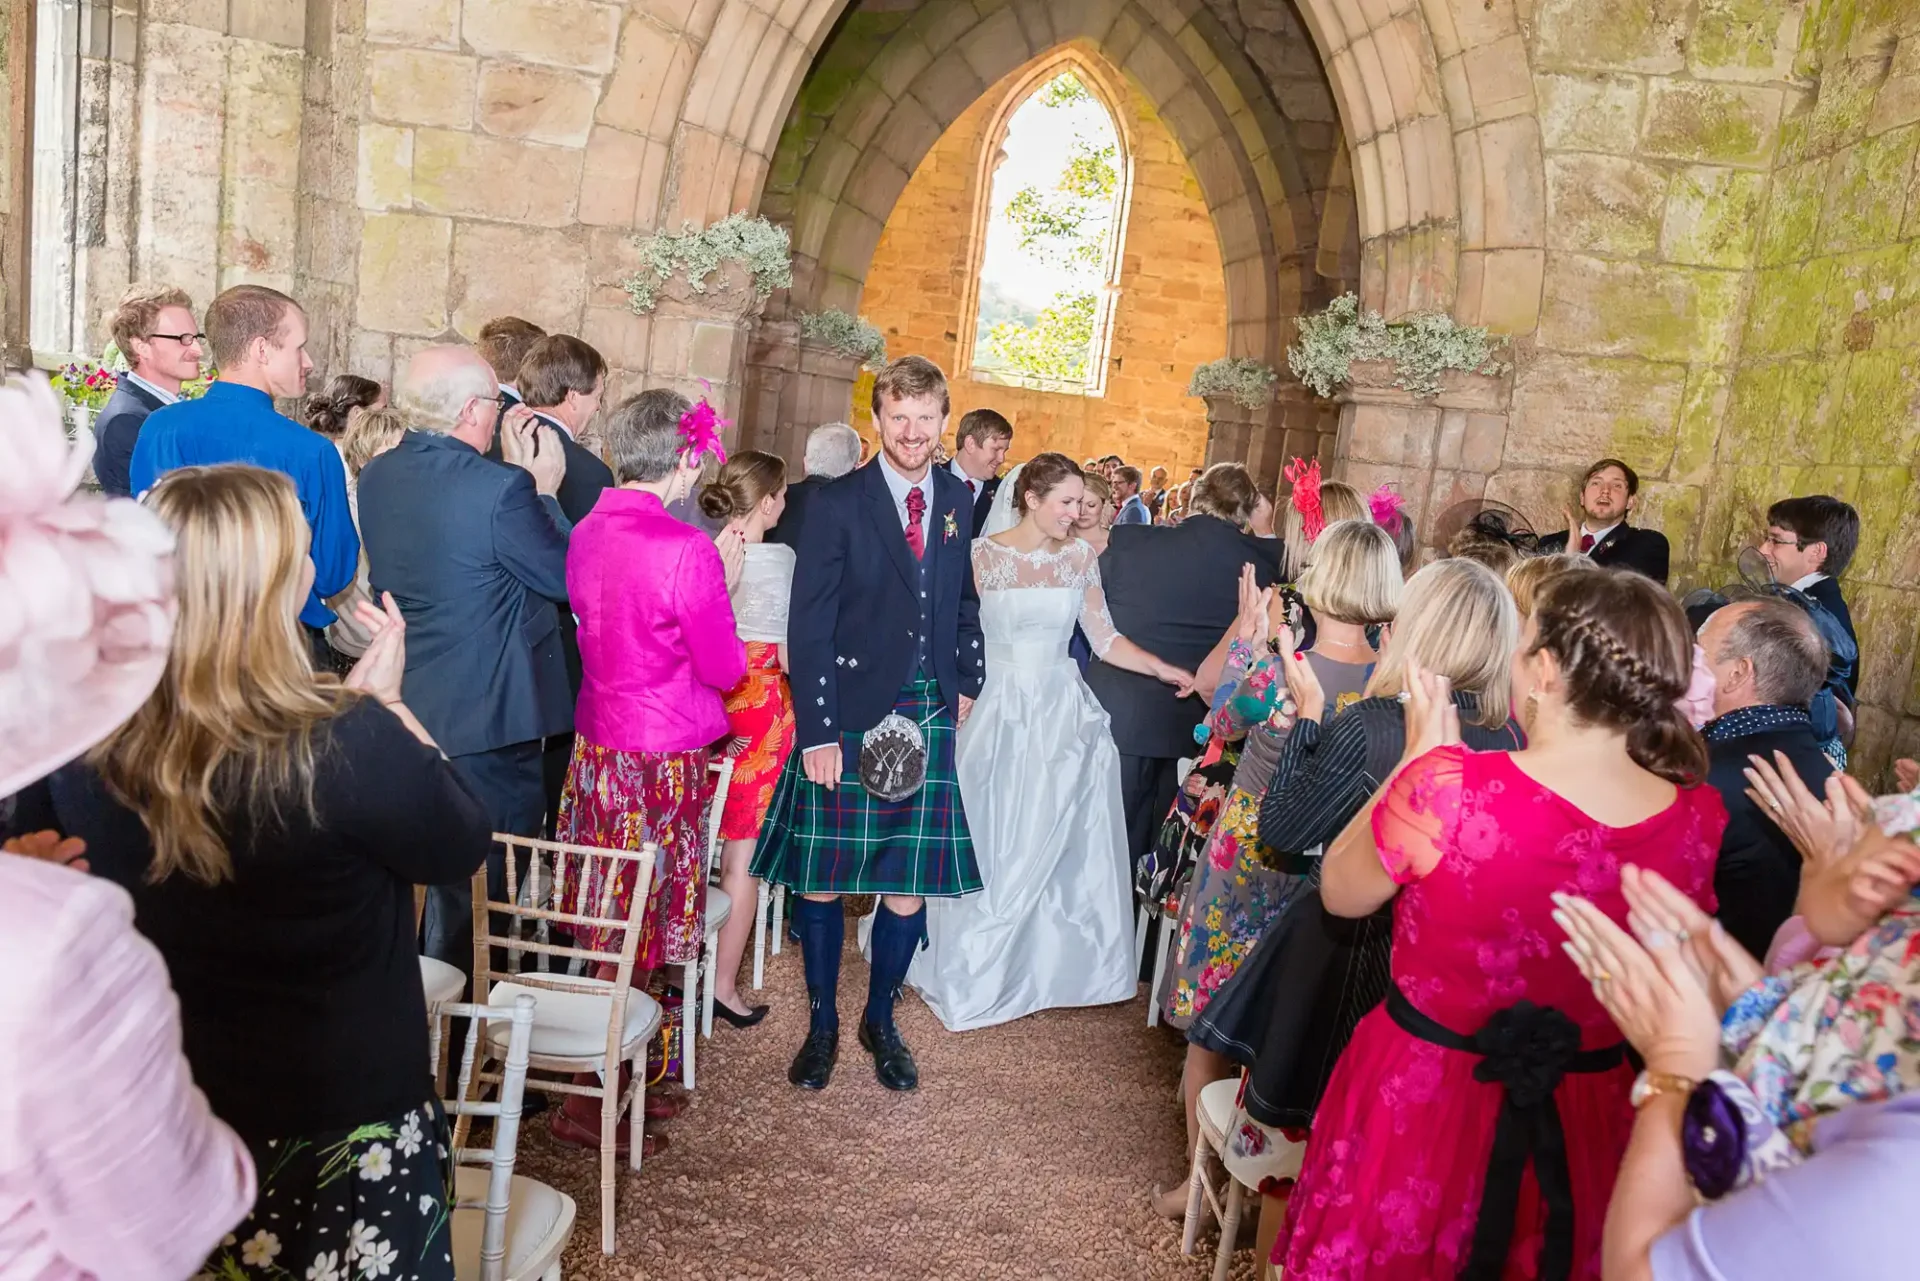 Bride and groom walking down the aisle in a church, surrounded by guests clapping, the groom in a kilt and the bride in a white dress.